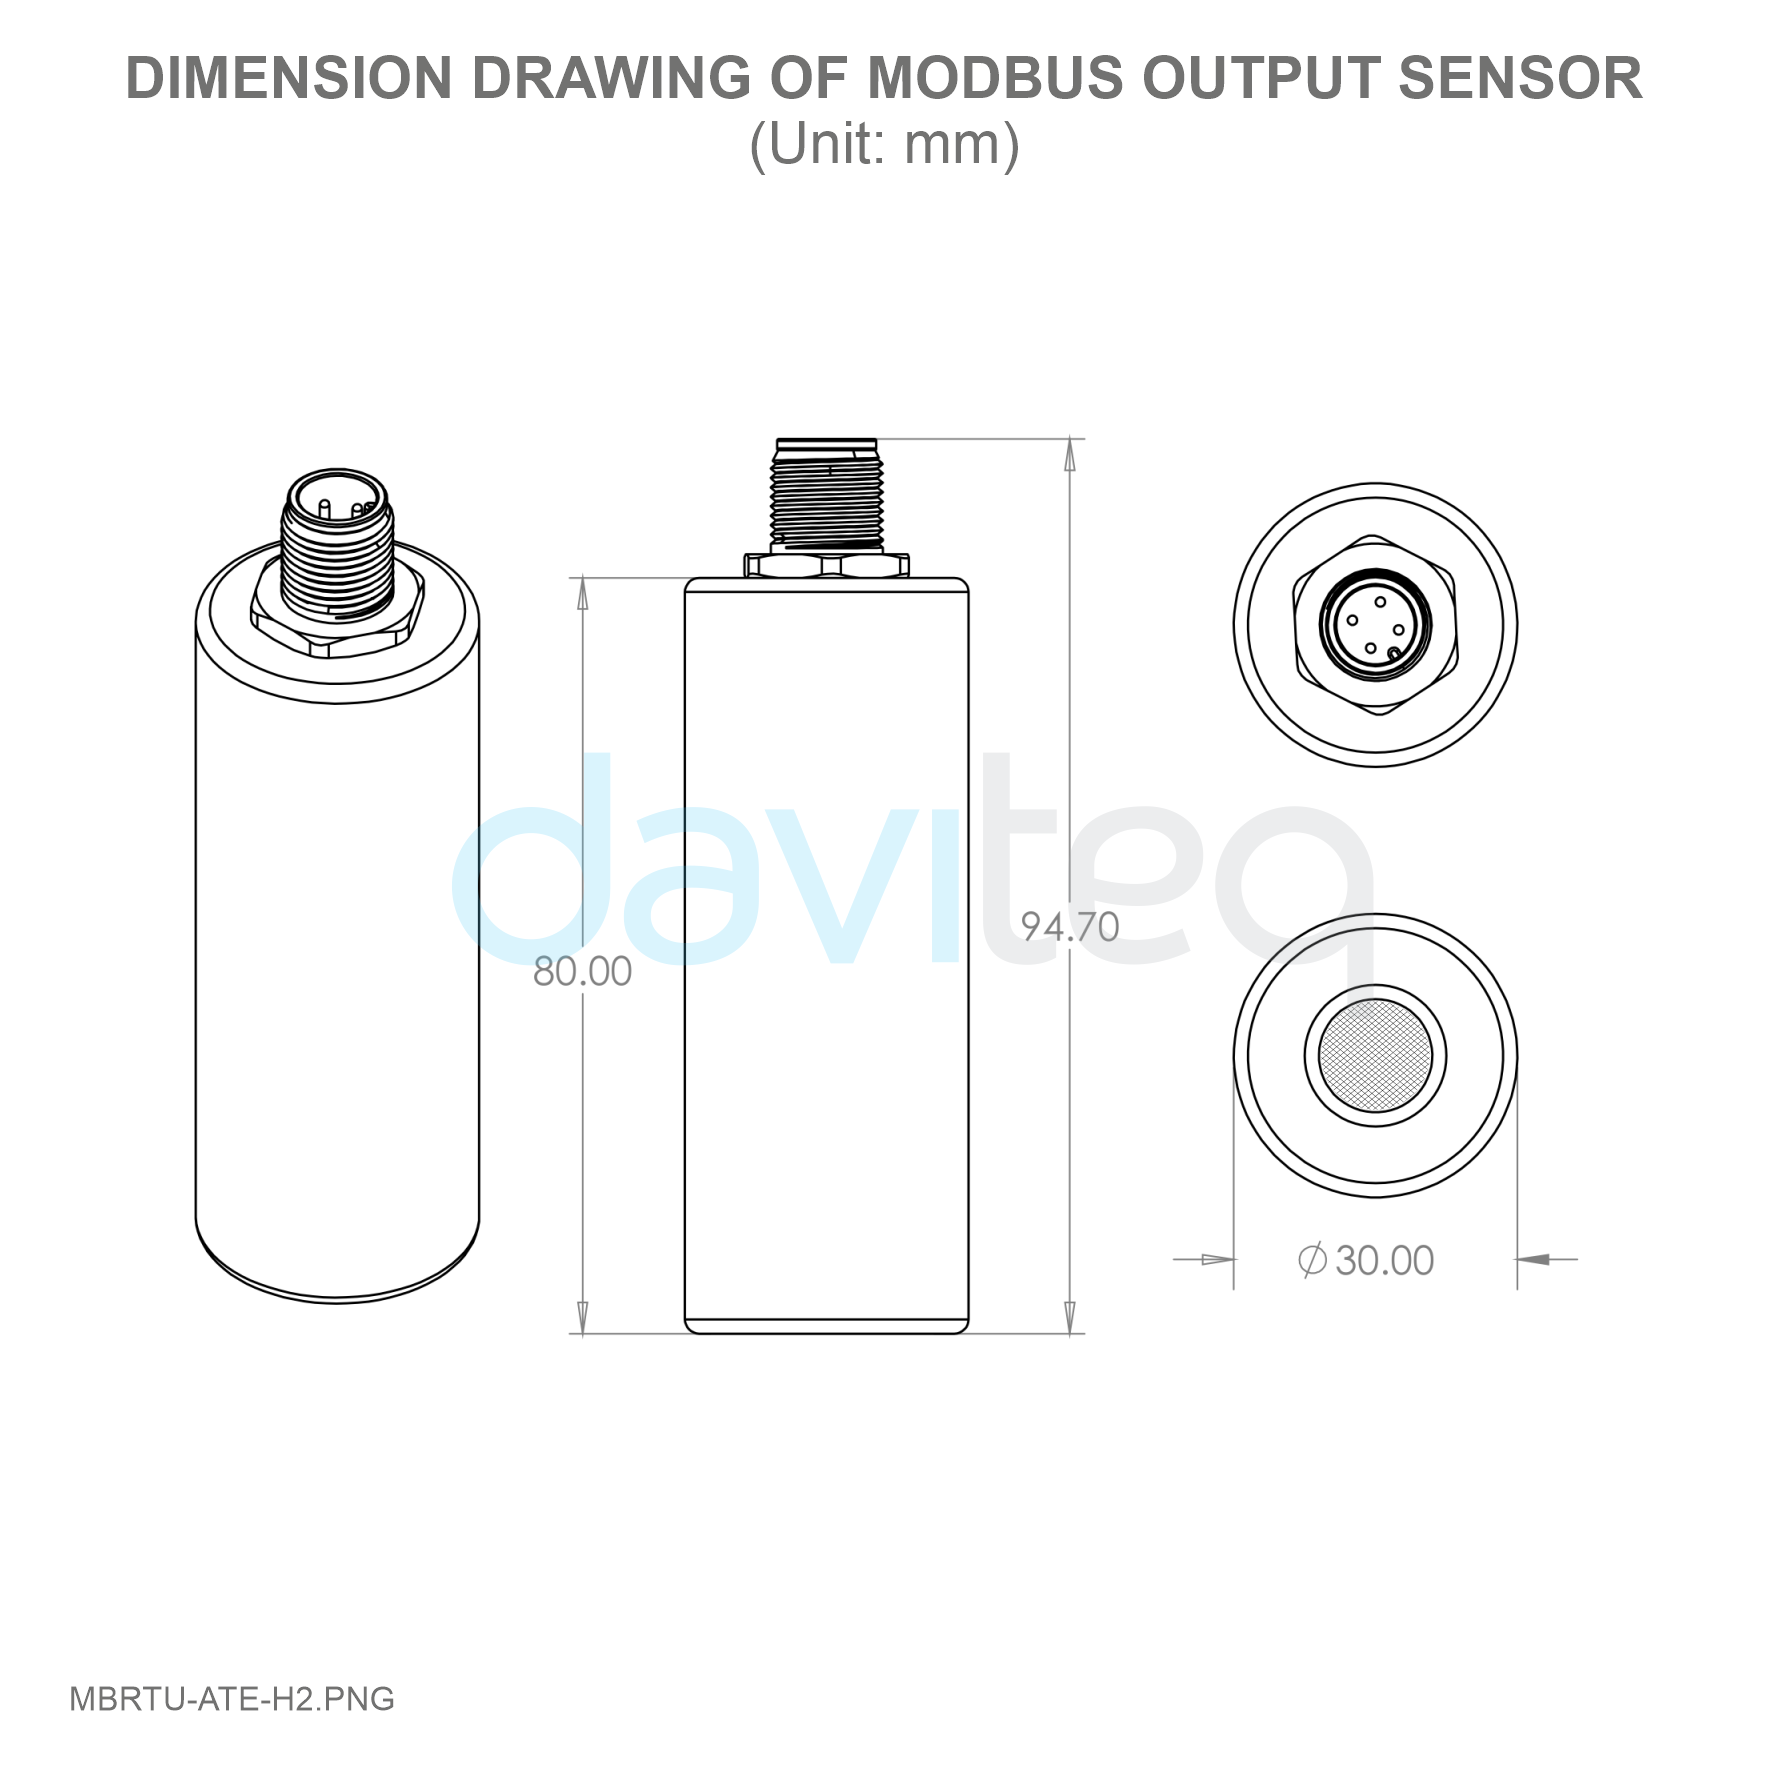 Temperature sensor with Modbus output MBRTU-ATE-H2.png